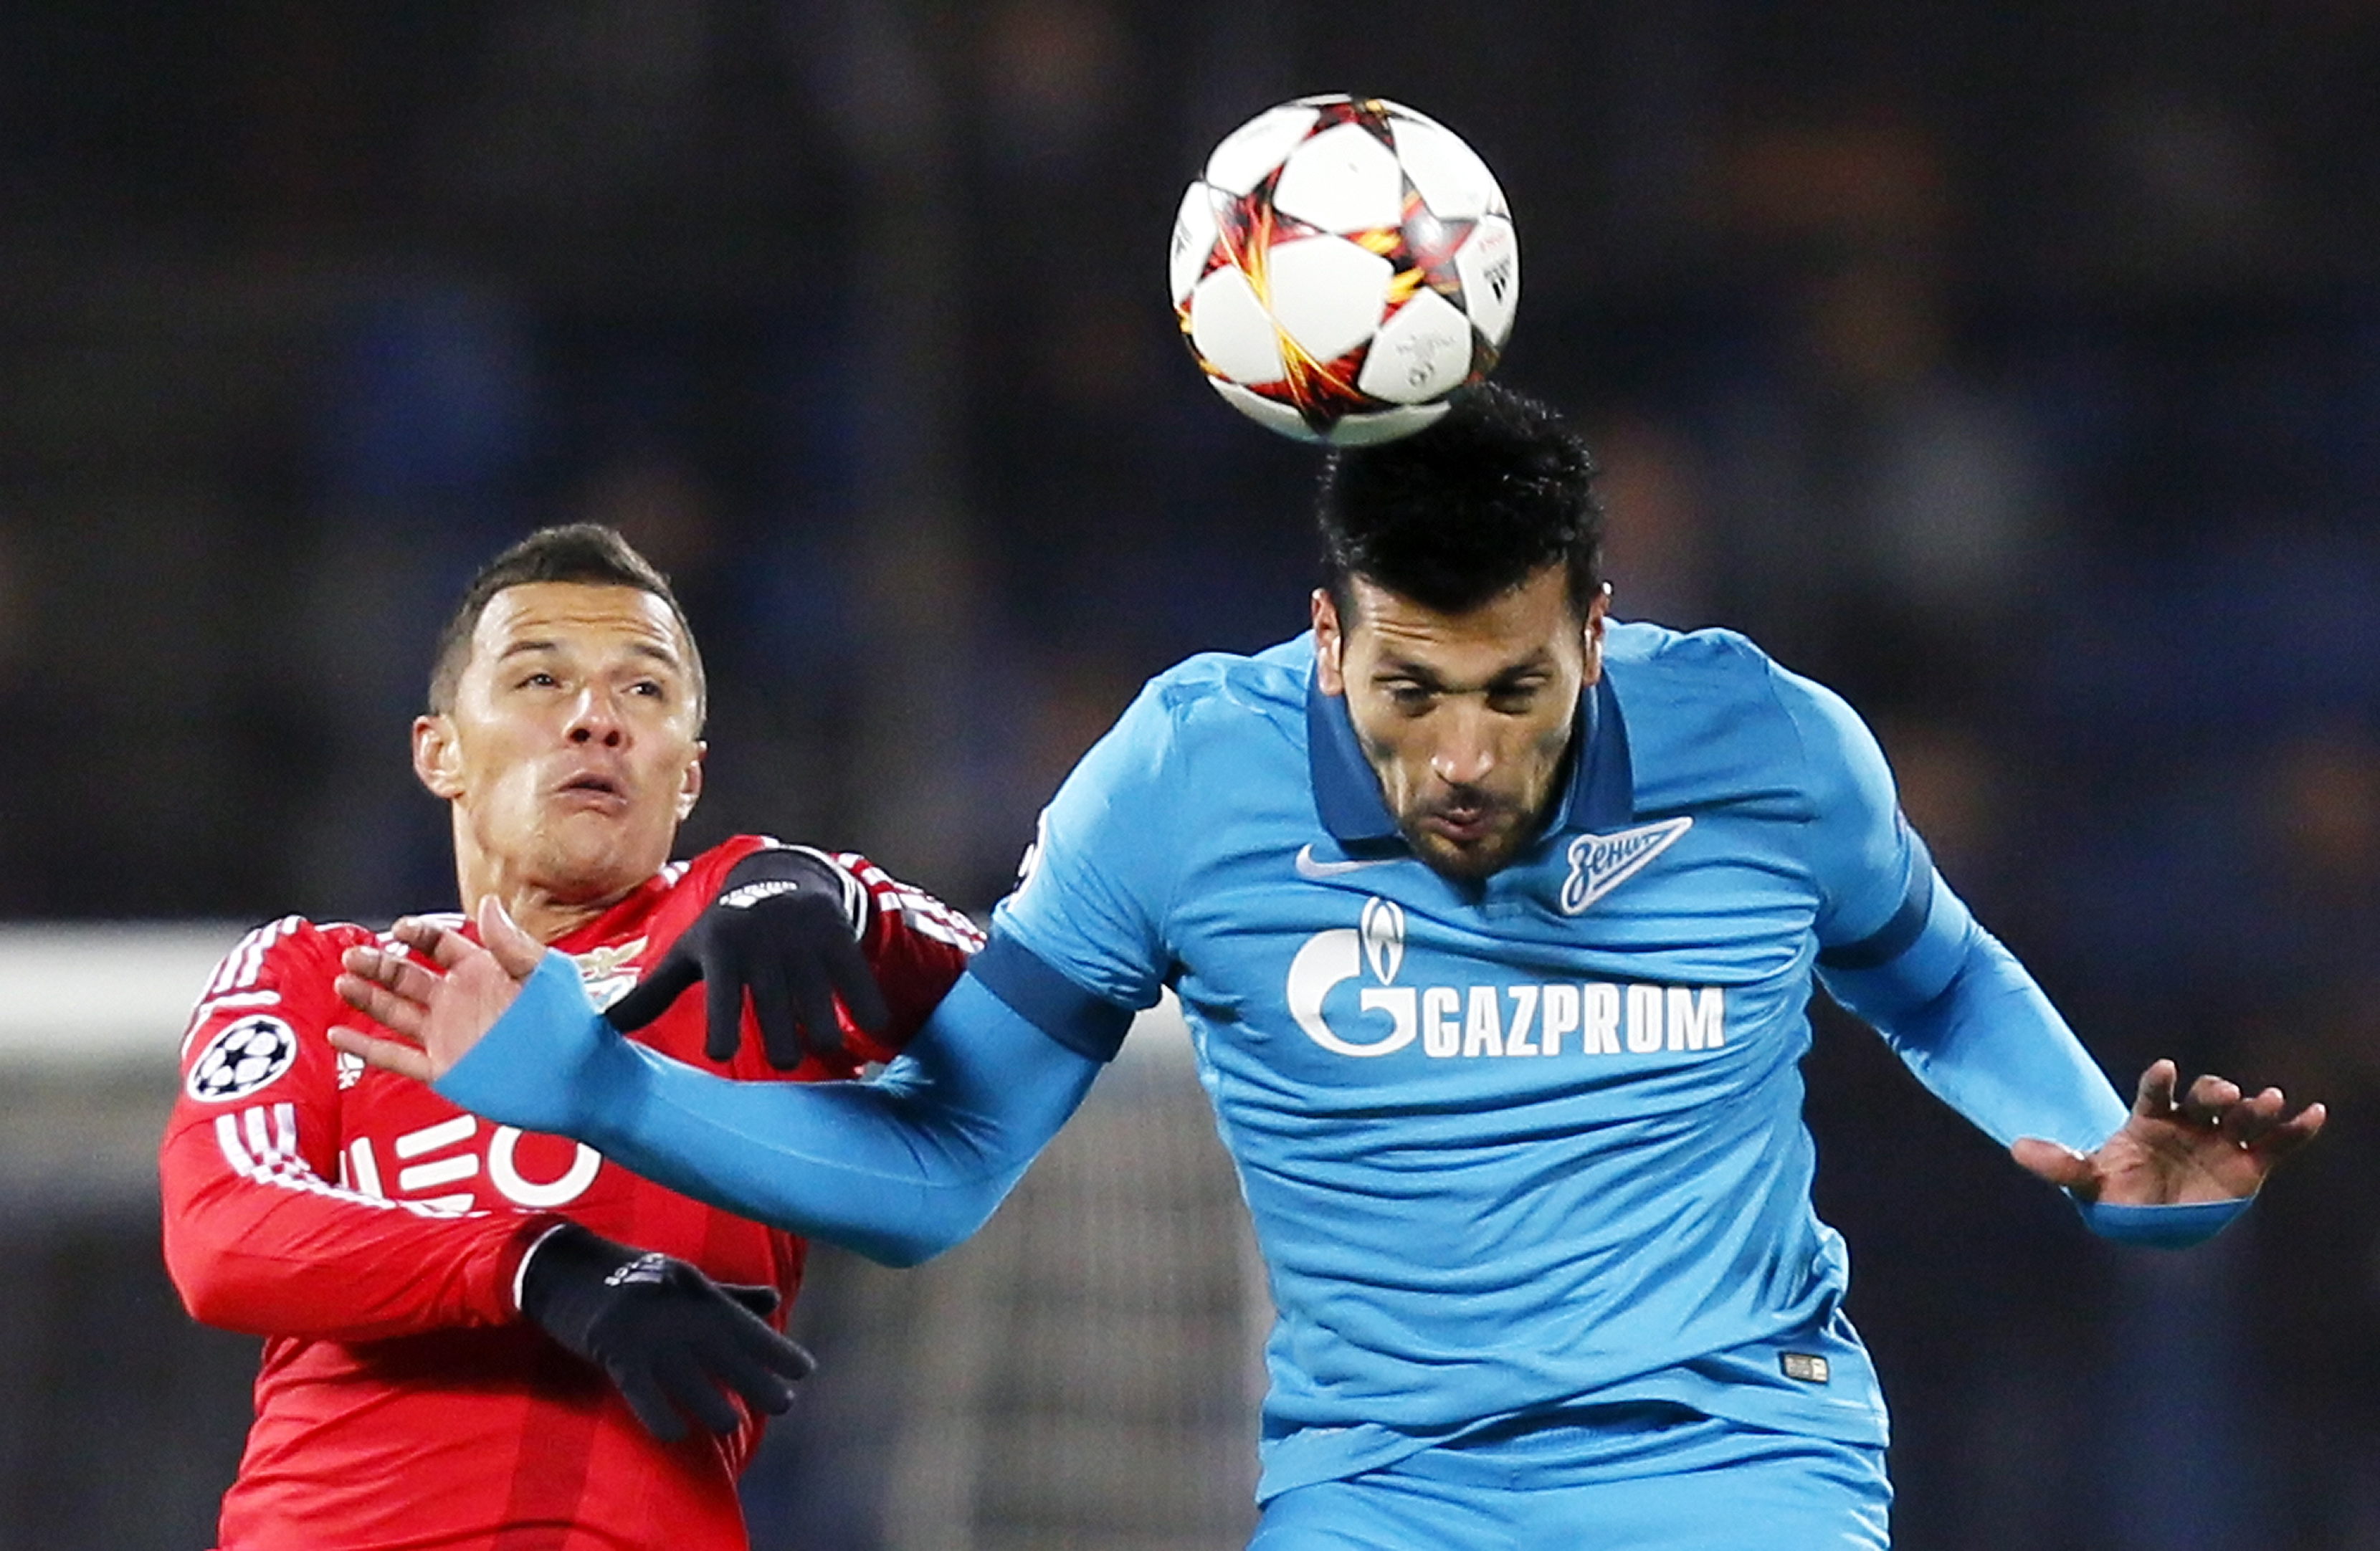 epa04504992 Lima (L) SL Benfica  in action against Ezequiel Garay of Zenit St.Petersburg during UEFA Champions League soccer match Group stage - Group C between Zenit St.Petersburg and SL Benfica at the stadium Petrovski in St Petersburg, Russia, 26 November 2014.  EPA/YURI KOCHETKOV